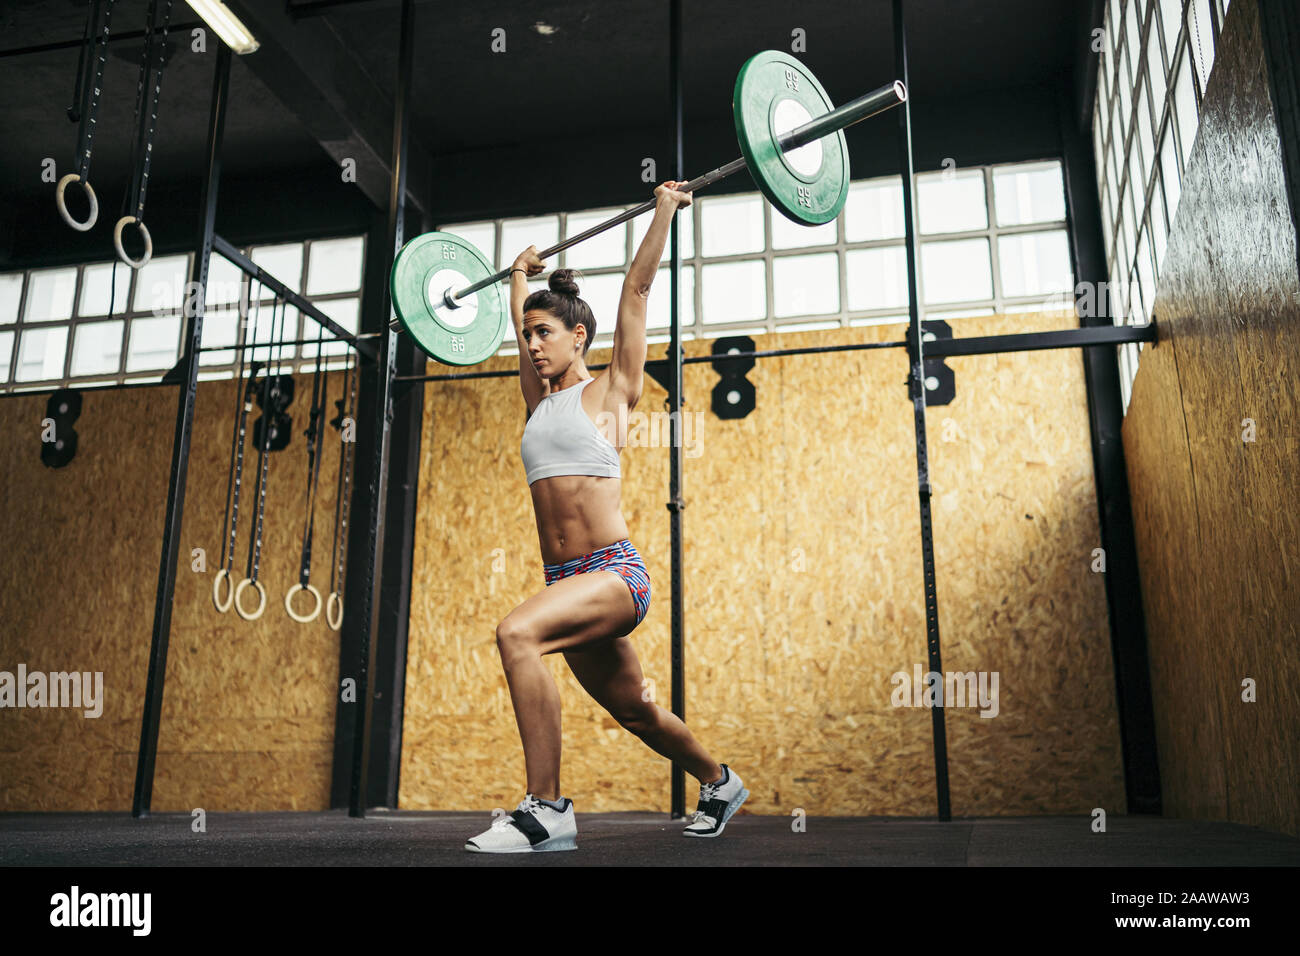 Young woman doing overhead squat exercise at gym Stock Photo - Alamy